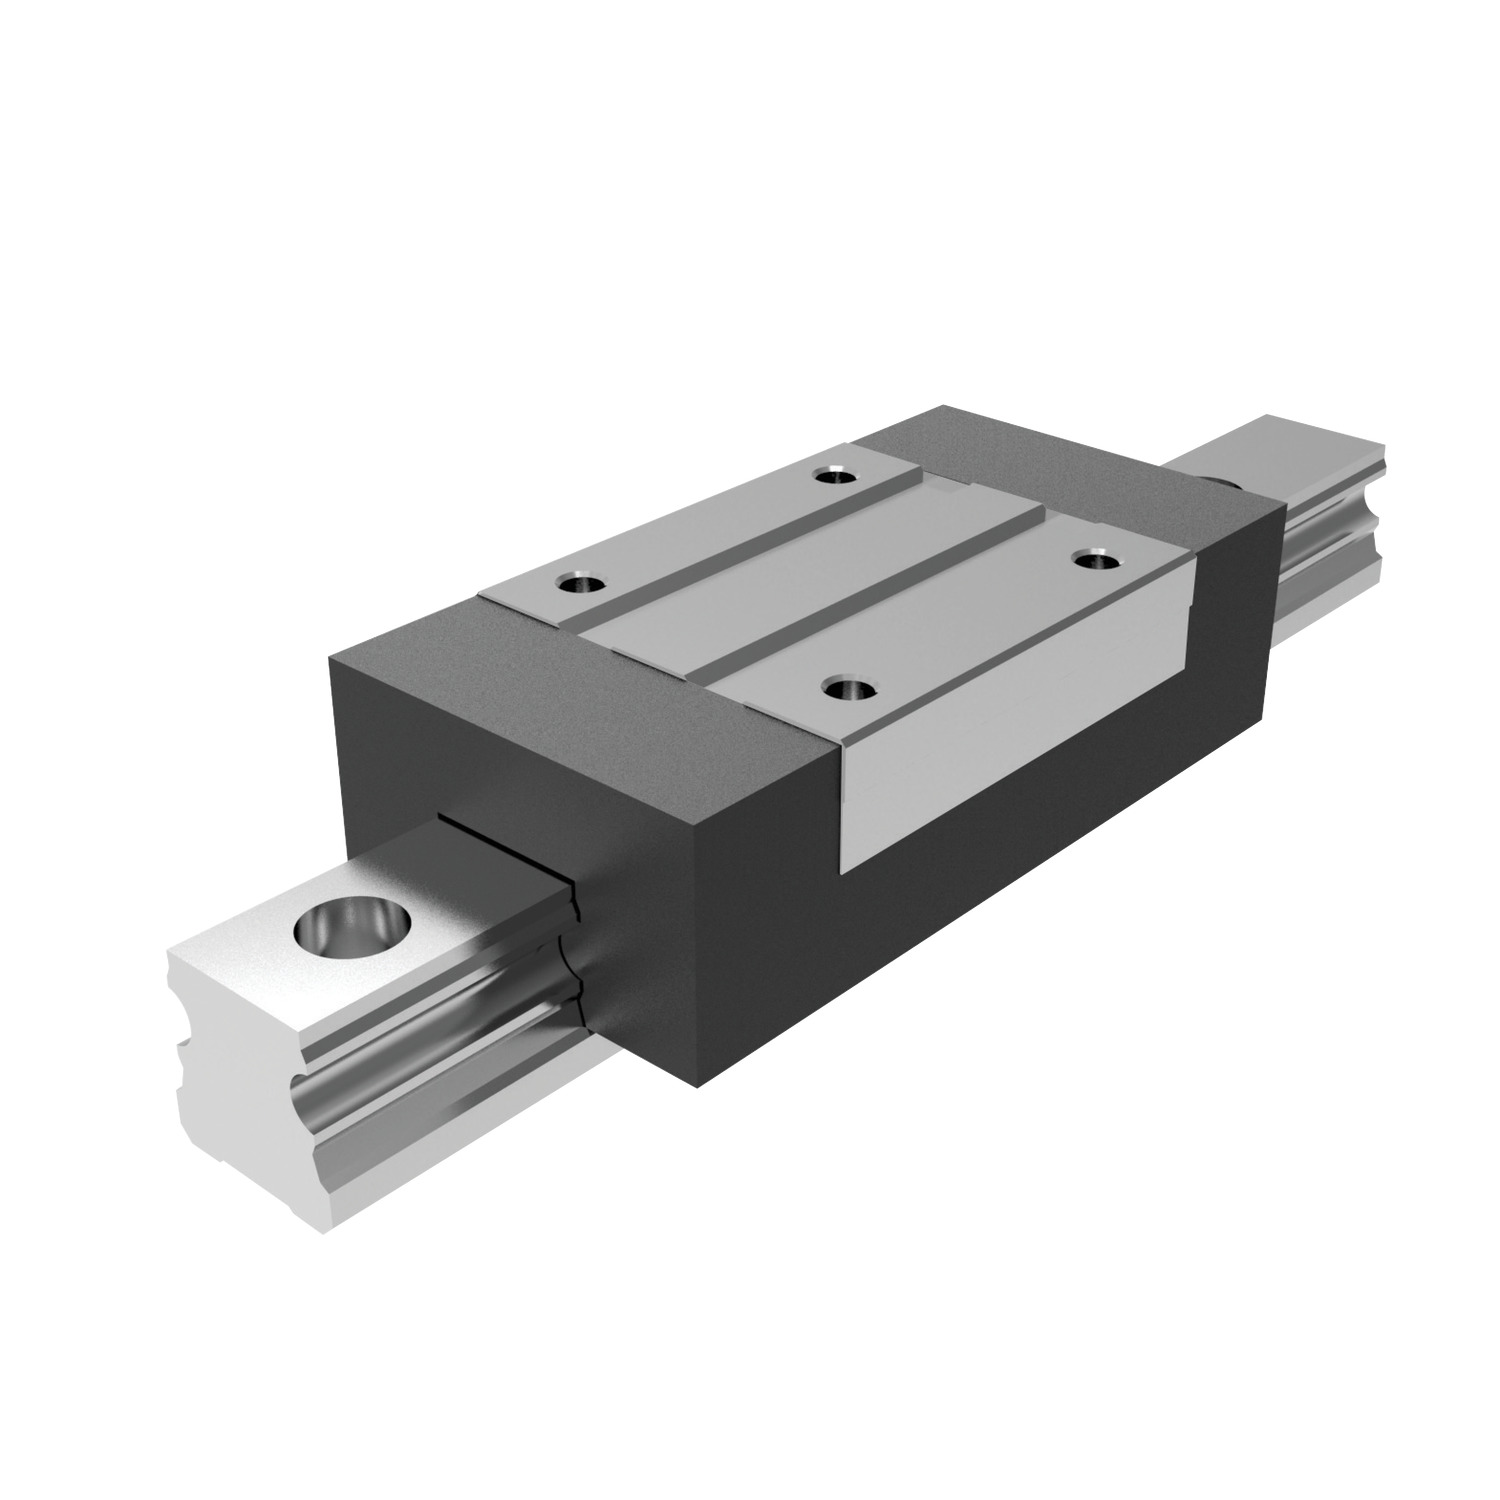 Unflanged Aluminium Carriages Unflanged carriages for aluminium linear guideways.